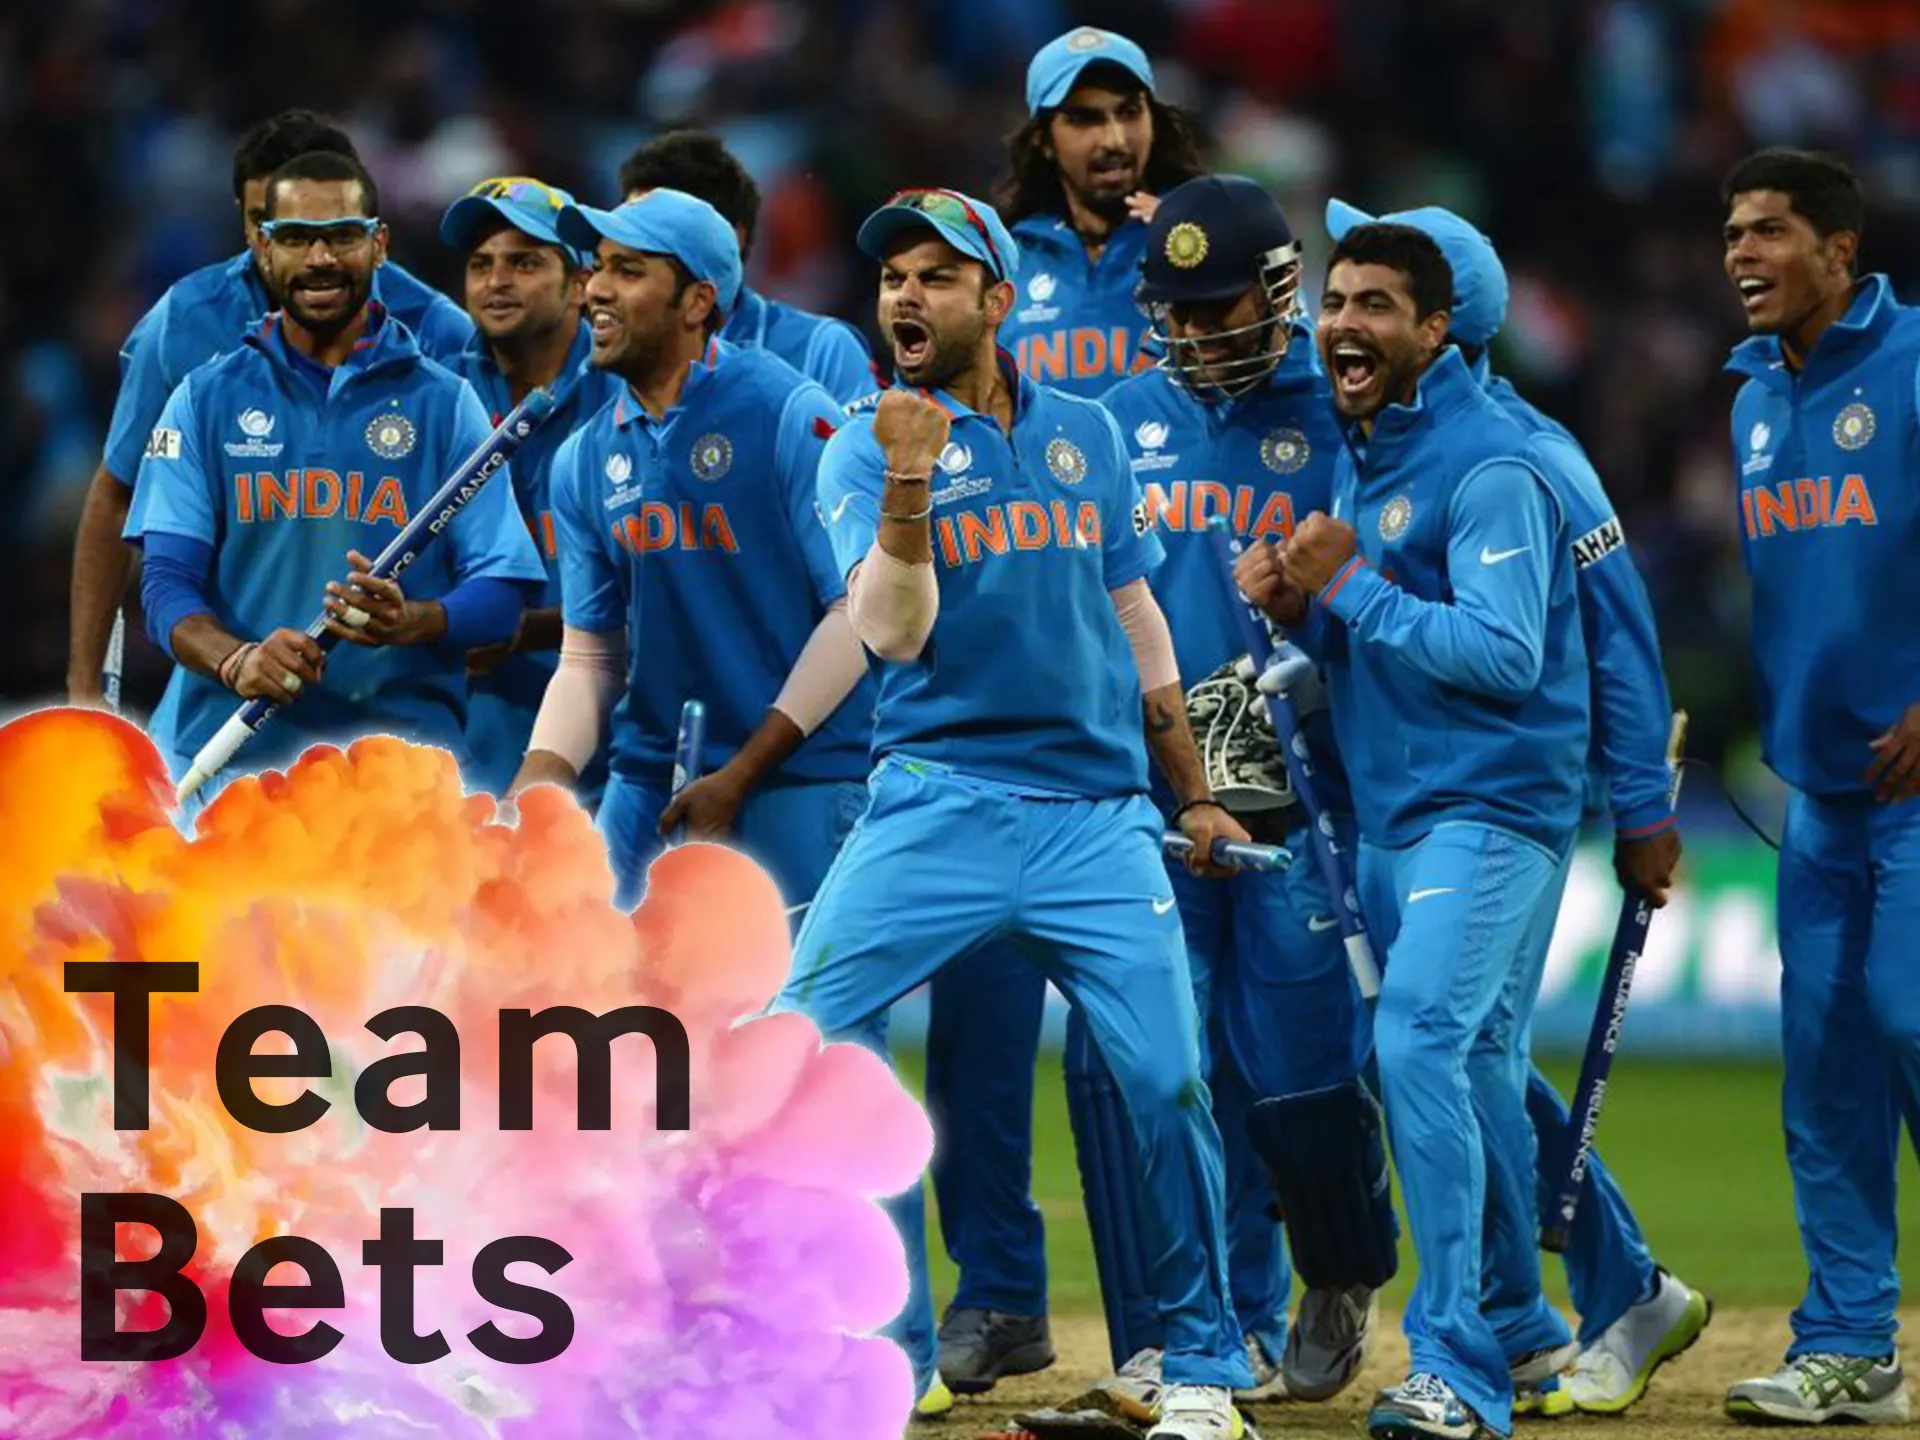 Team Bets on Cricket betting in India online.